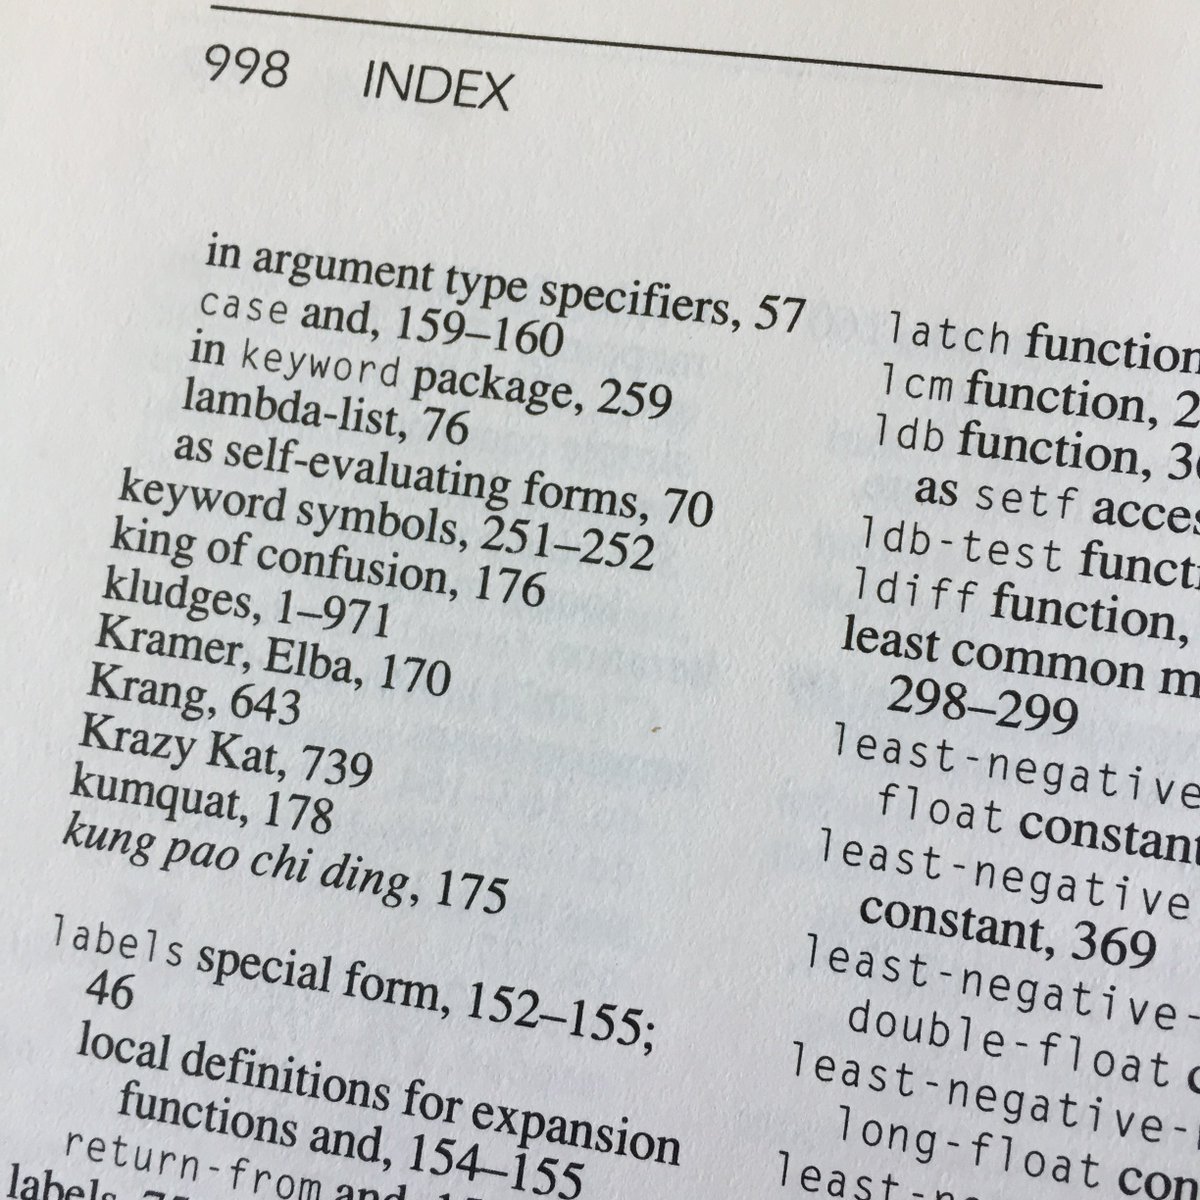 Photo of a page of CLtL2's Index, listing "kludges" as pages 1 to 971